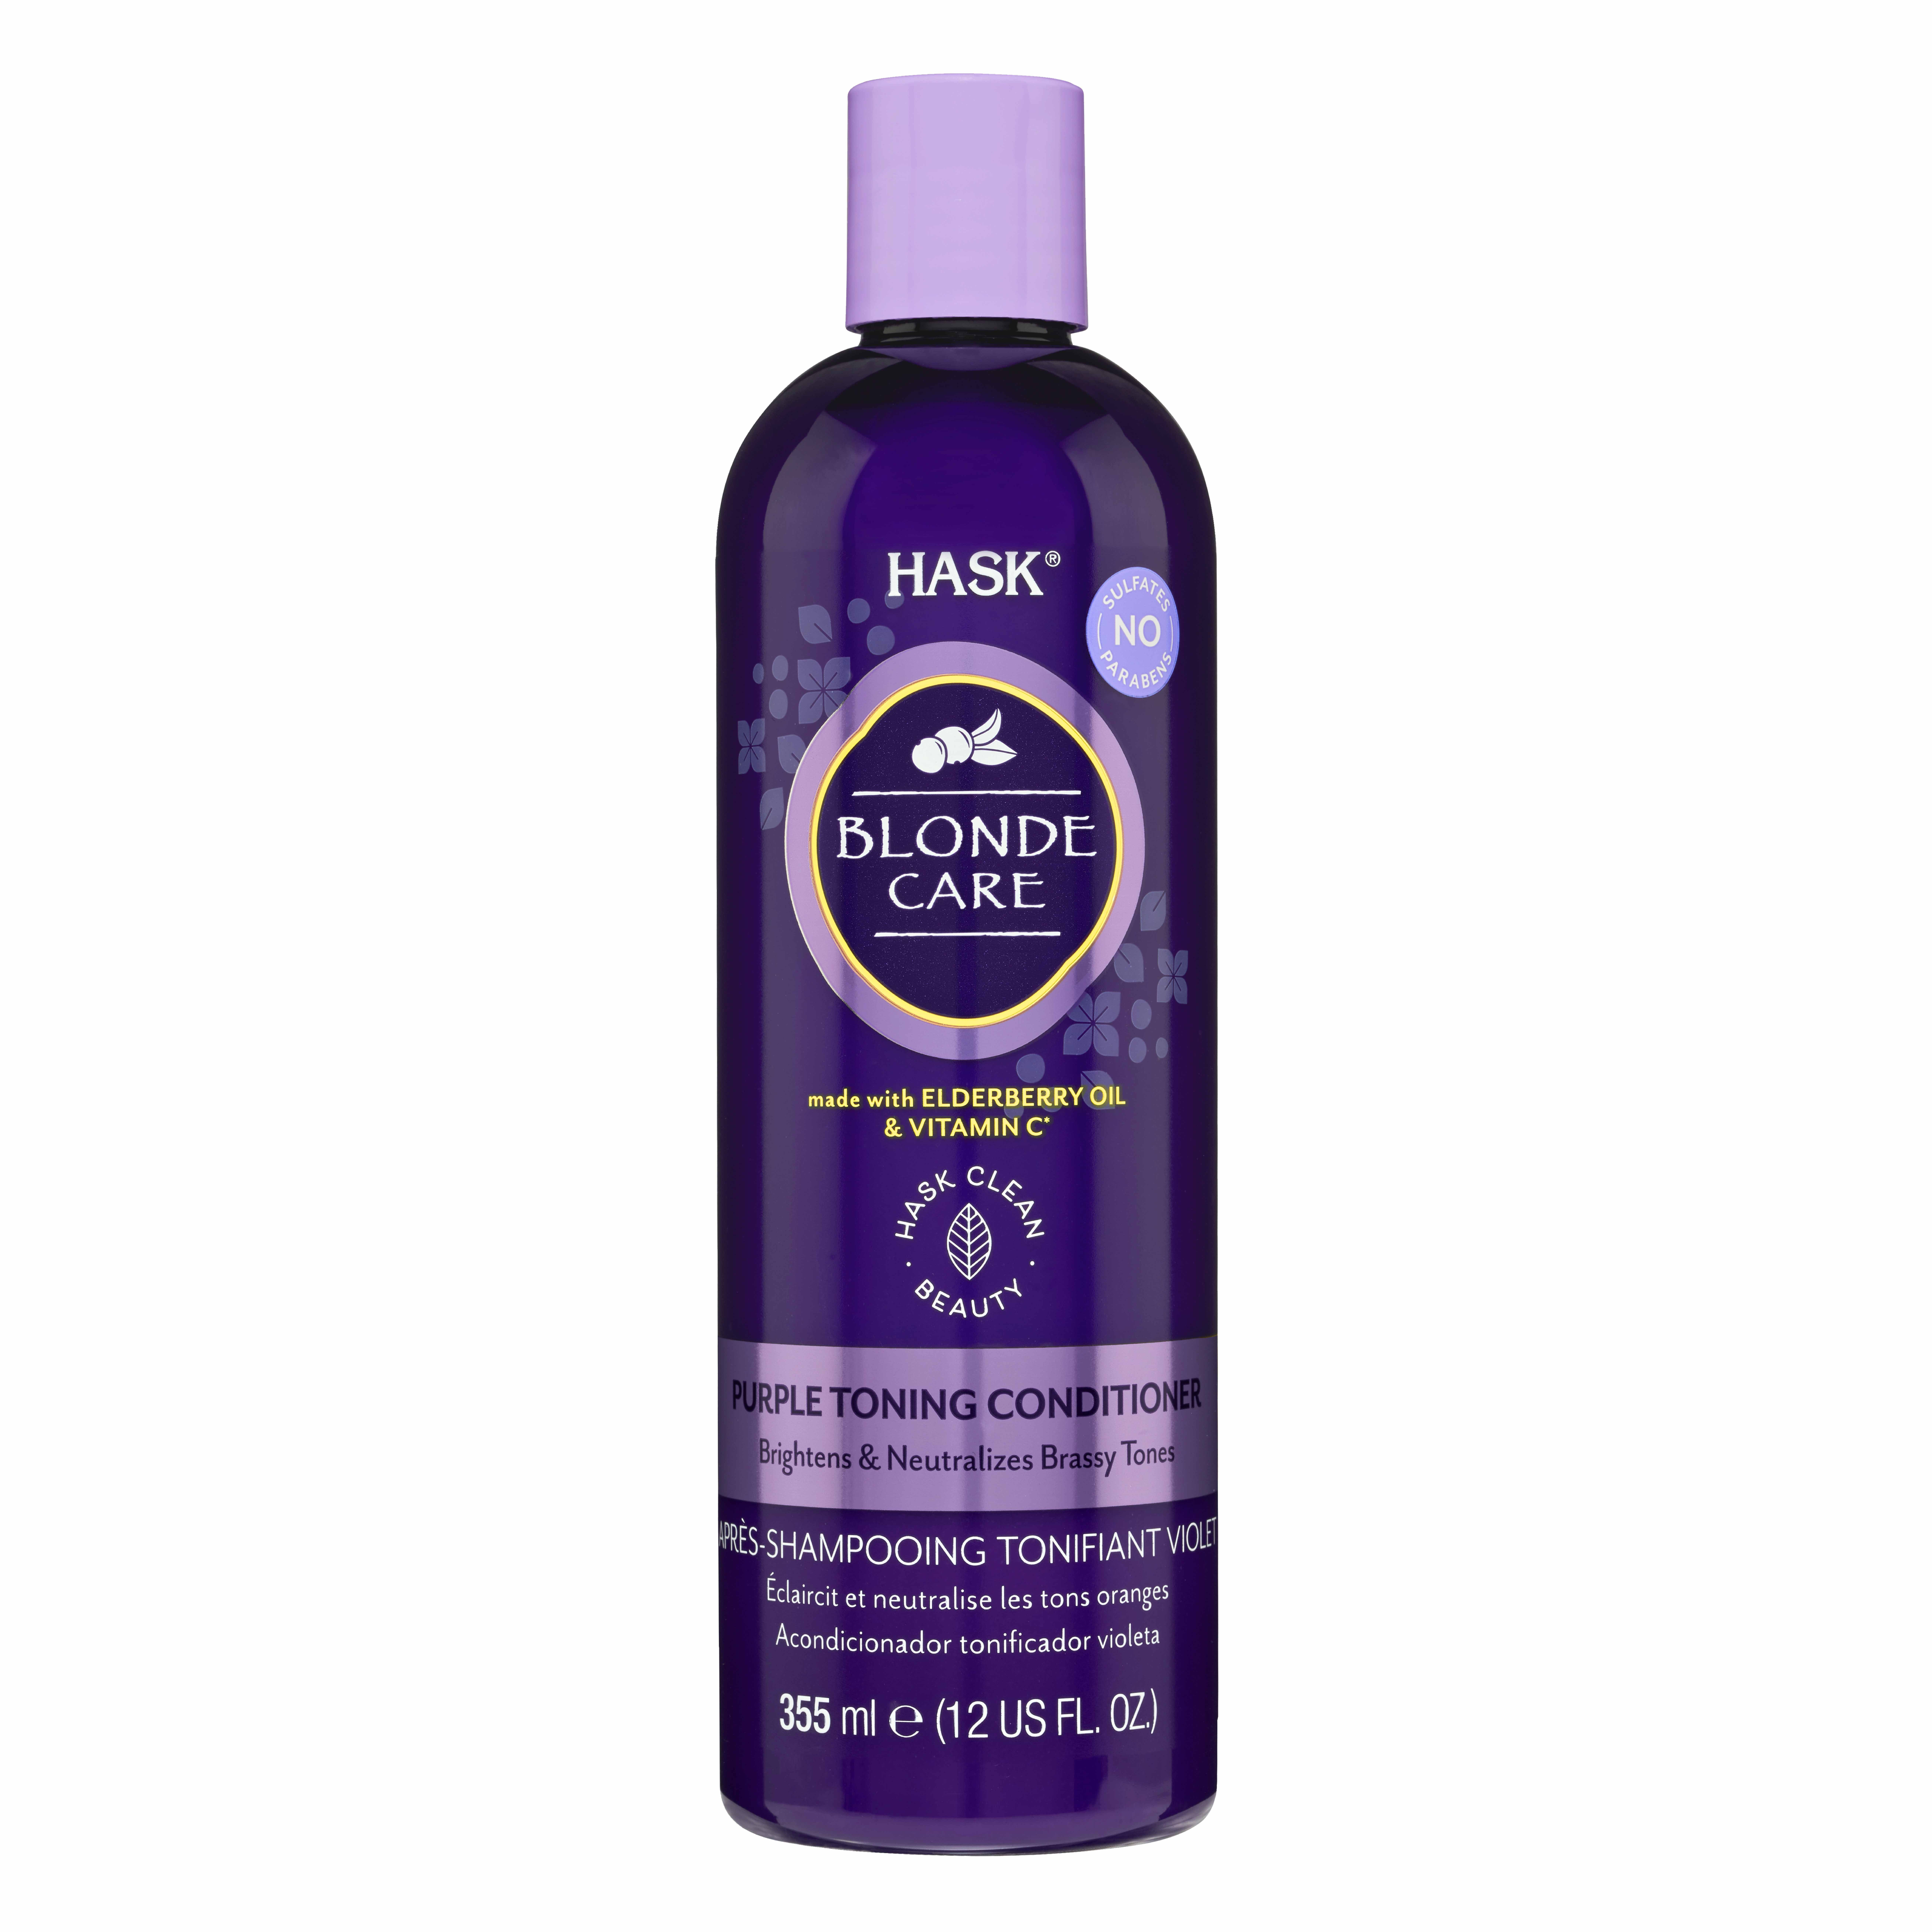 Hask Blonde Care Color Protection & Moisturizing Sulfate-Free Purple Toning Conditioner with Elderberry Oil, Vitamin C, 12 fl oz